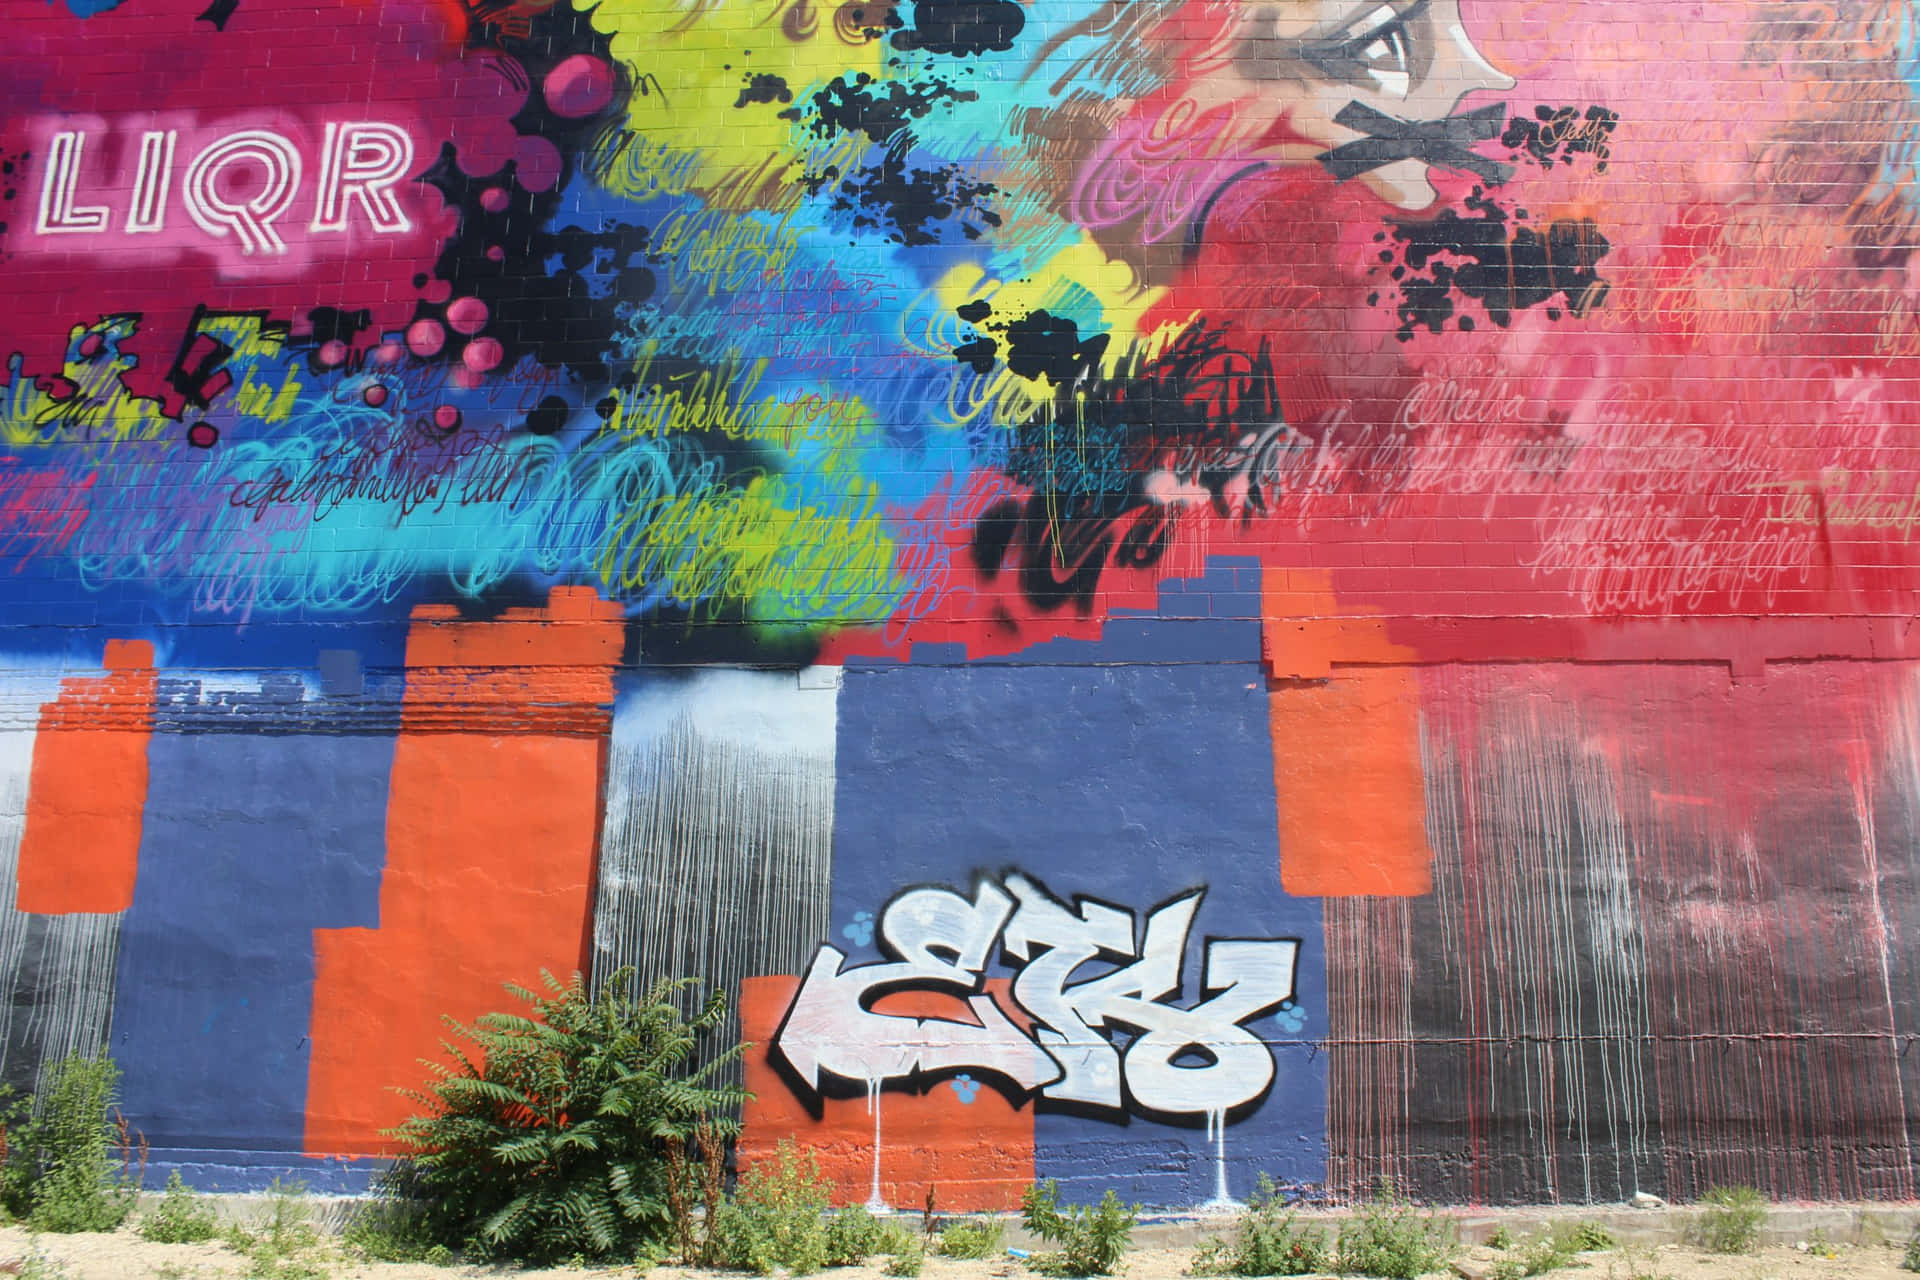 "A vibrant and captivating graffiti art mural brightens up the city streets"